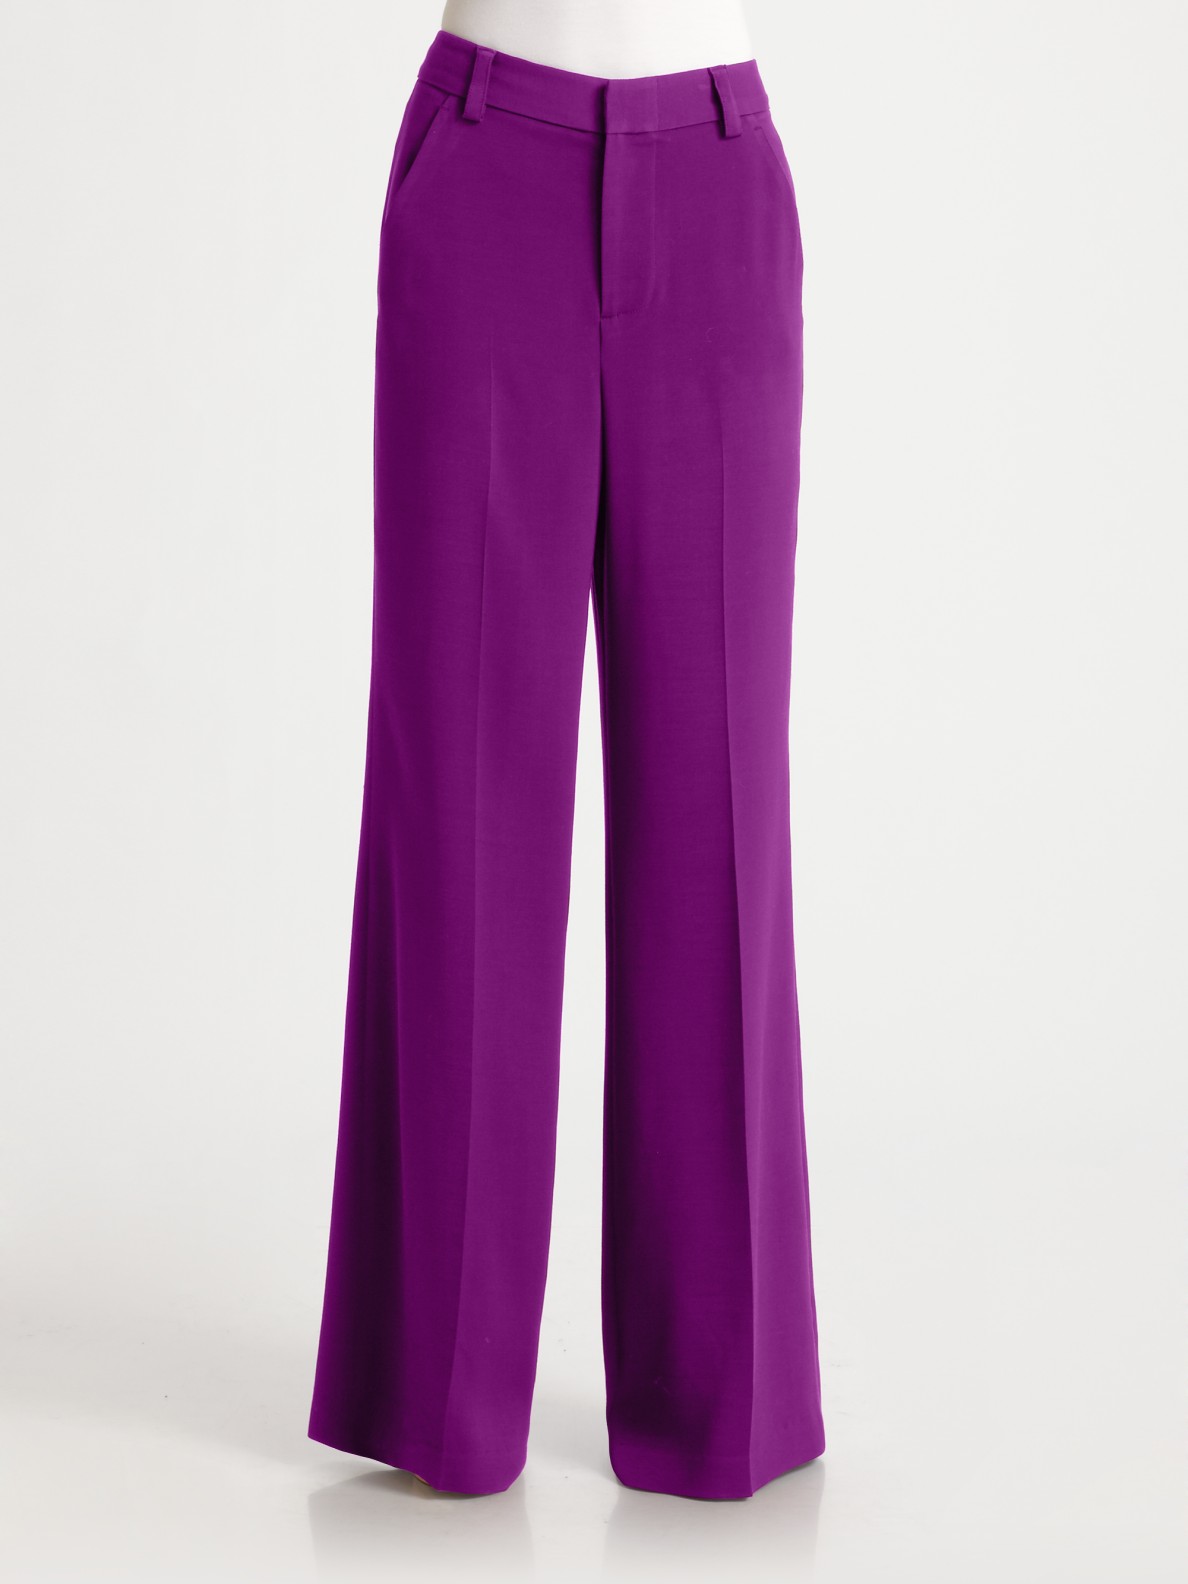 Lyst - Alice + olivia High-waisted Wide Leg Pants in Purple